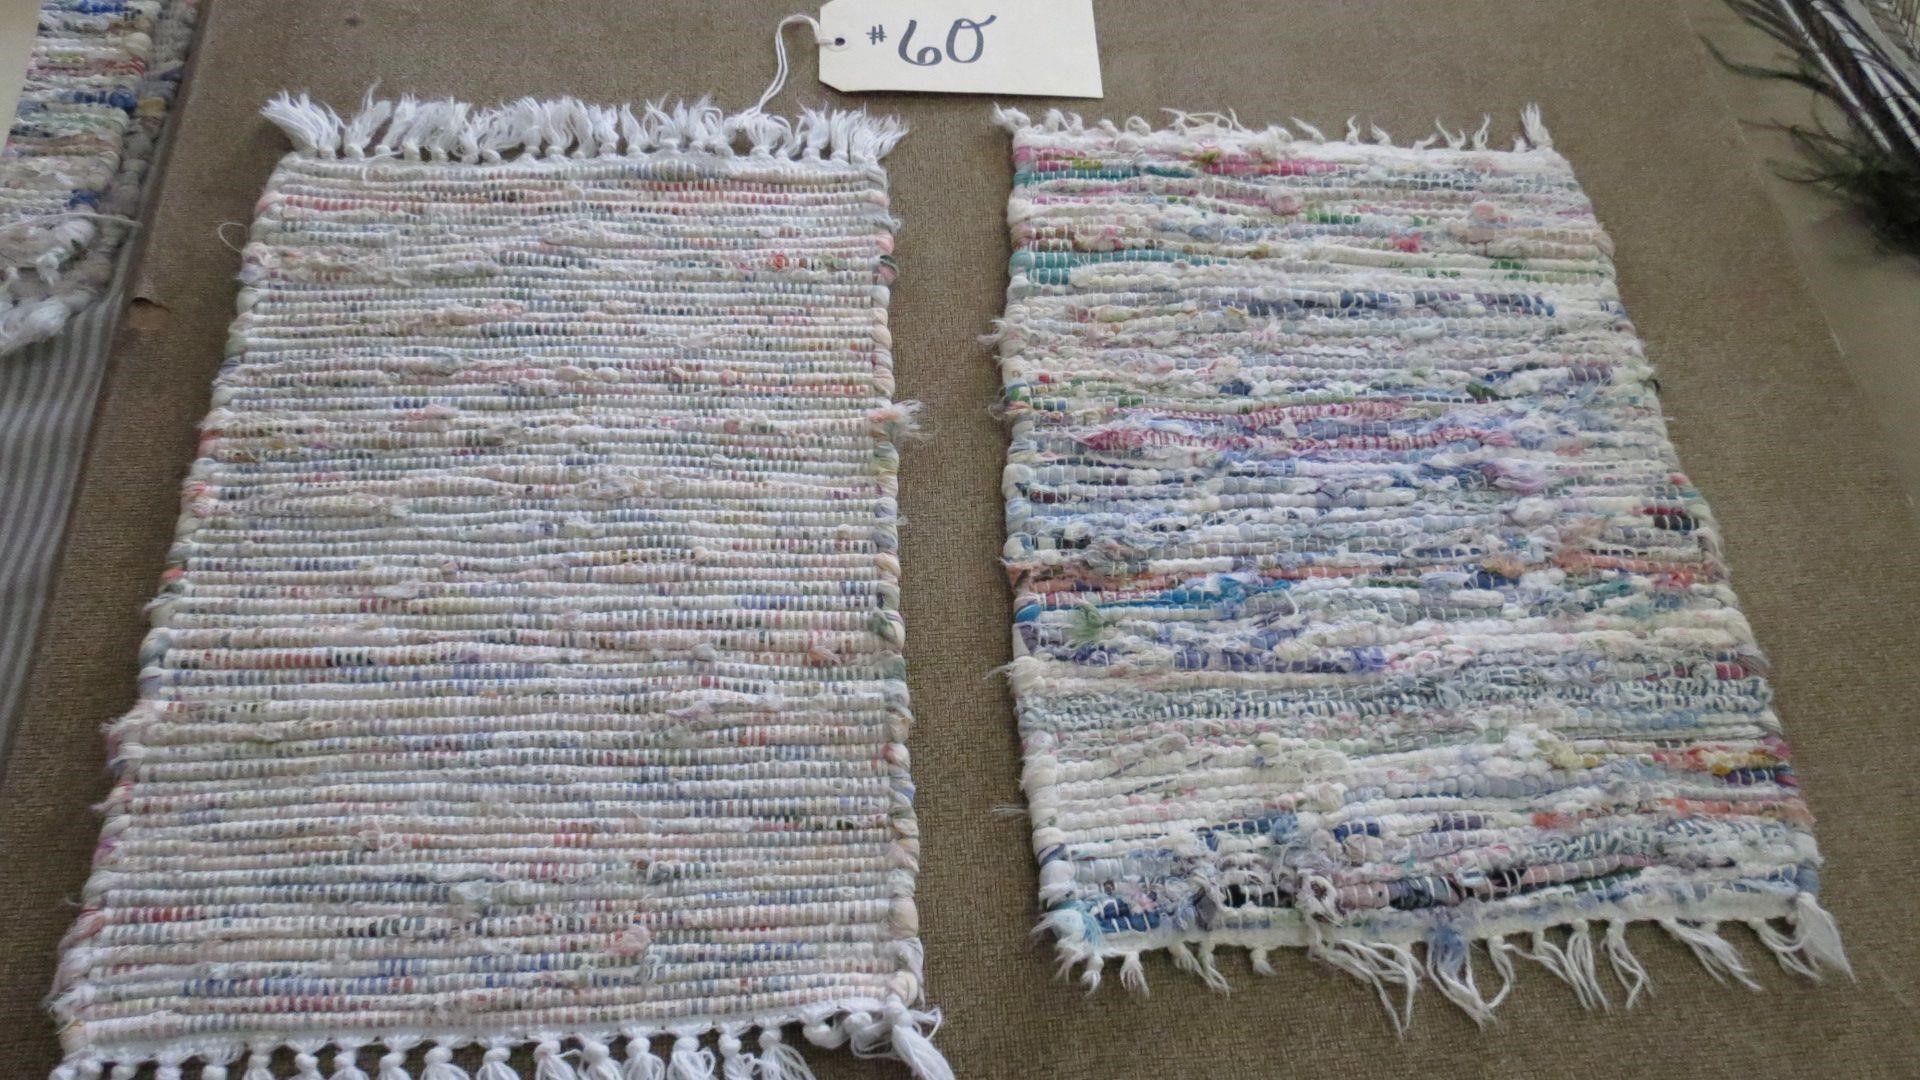 2 RAG RUG PLACE MATS 17" AND 20" LONG